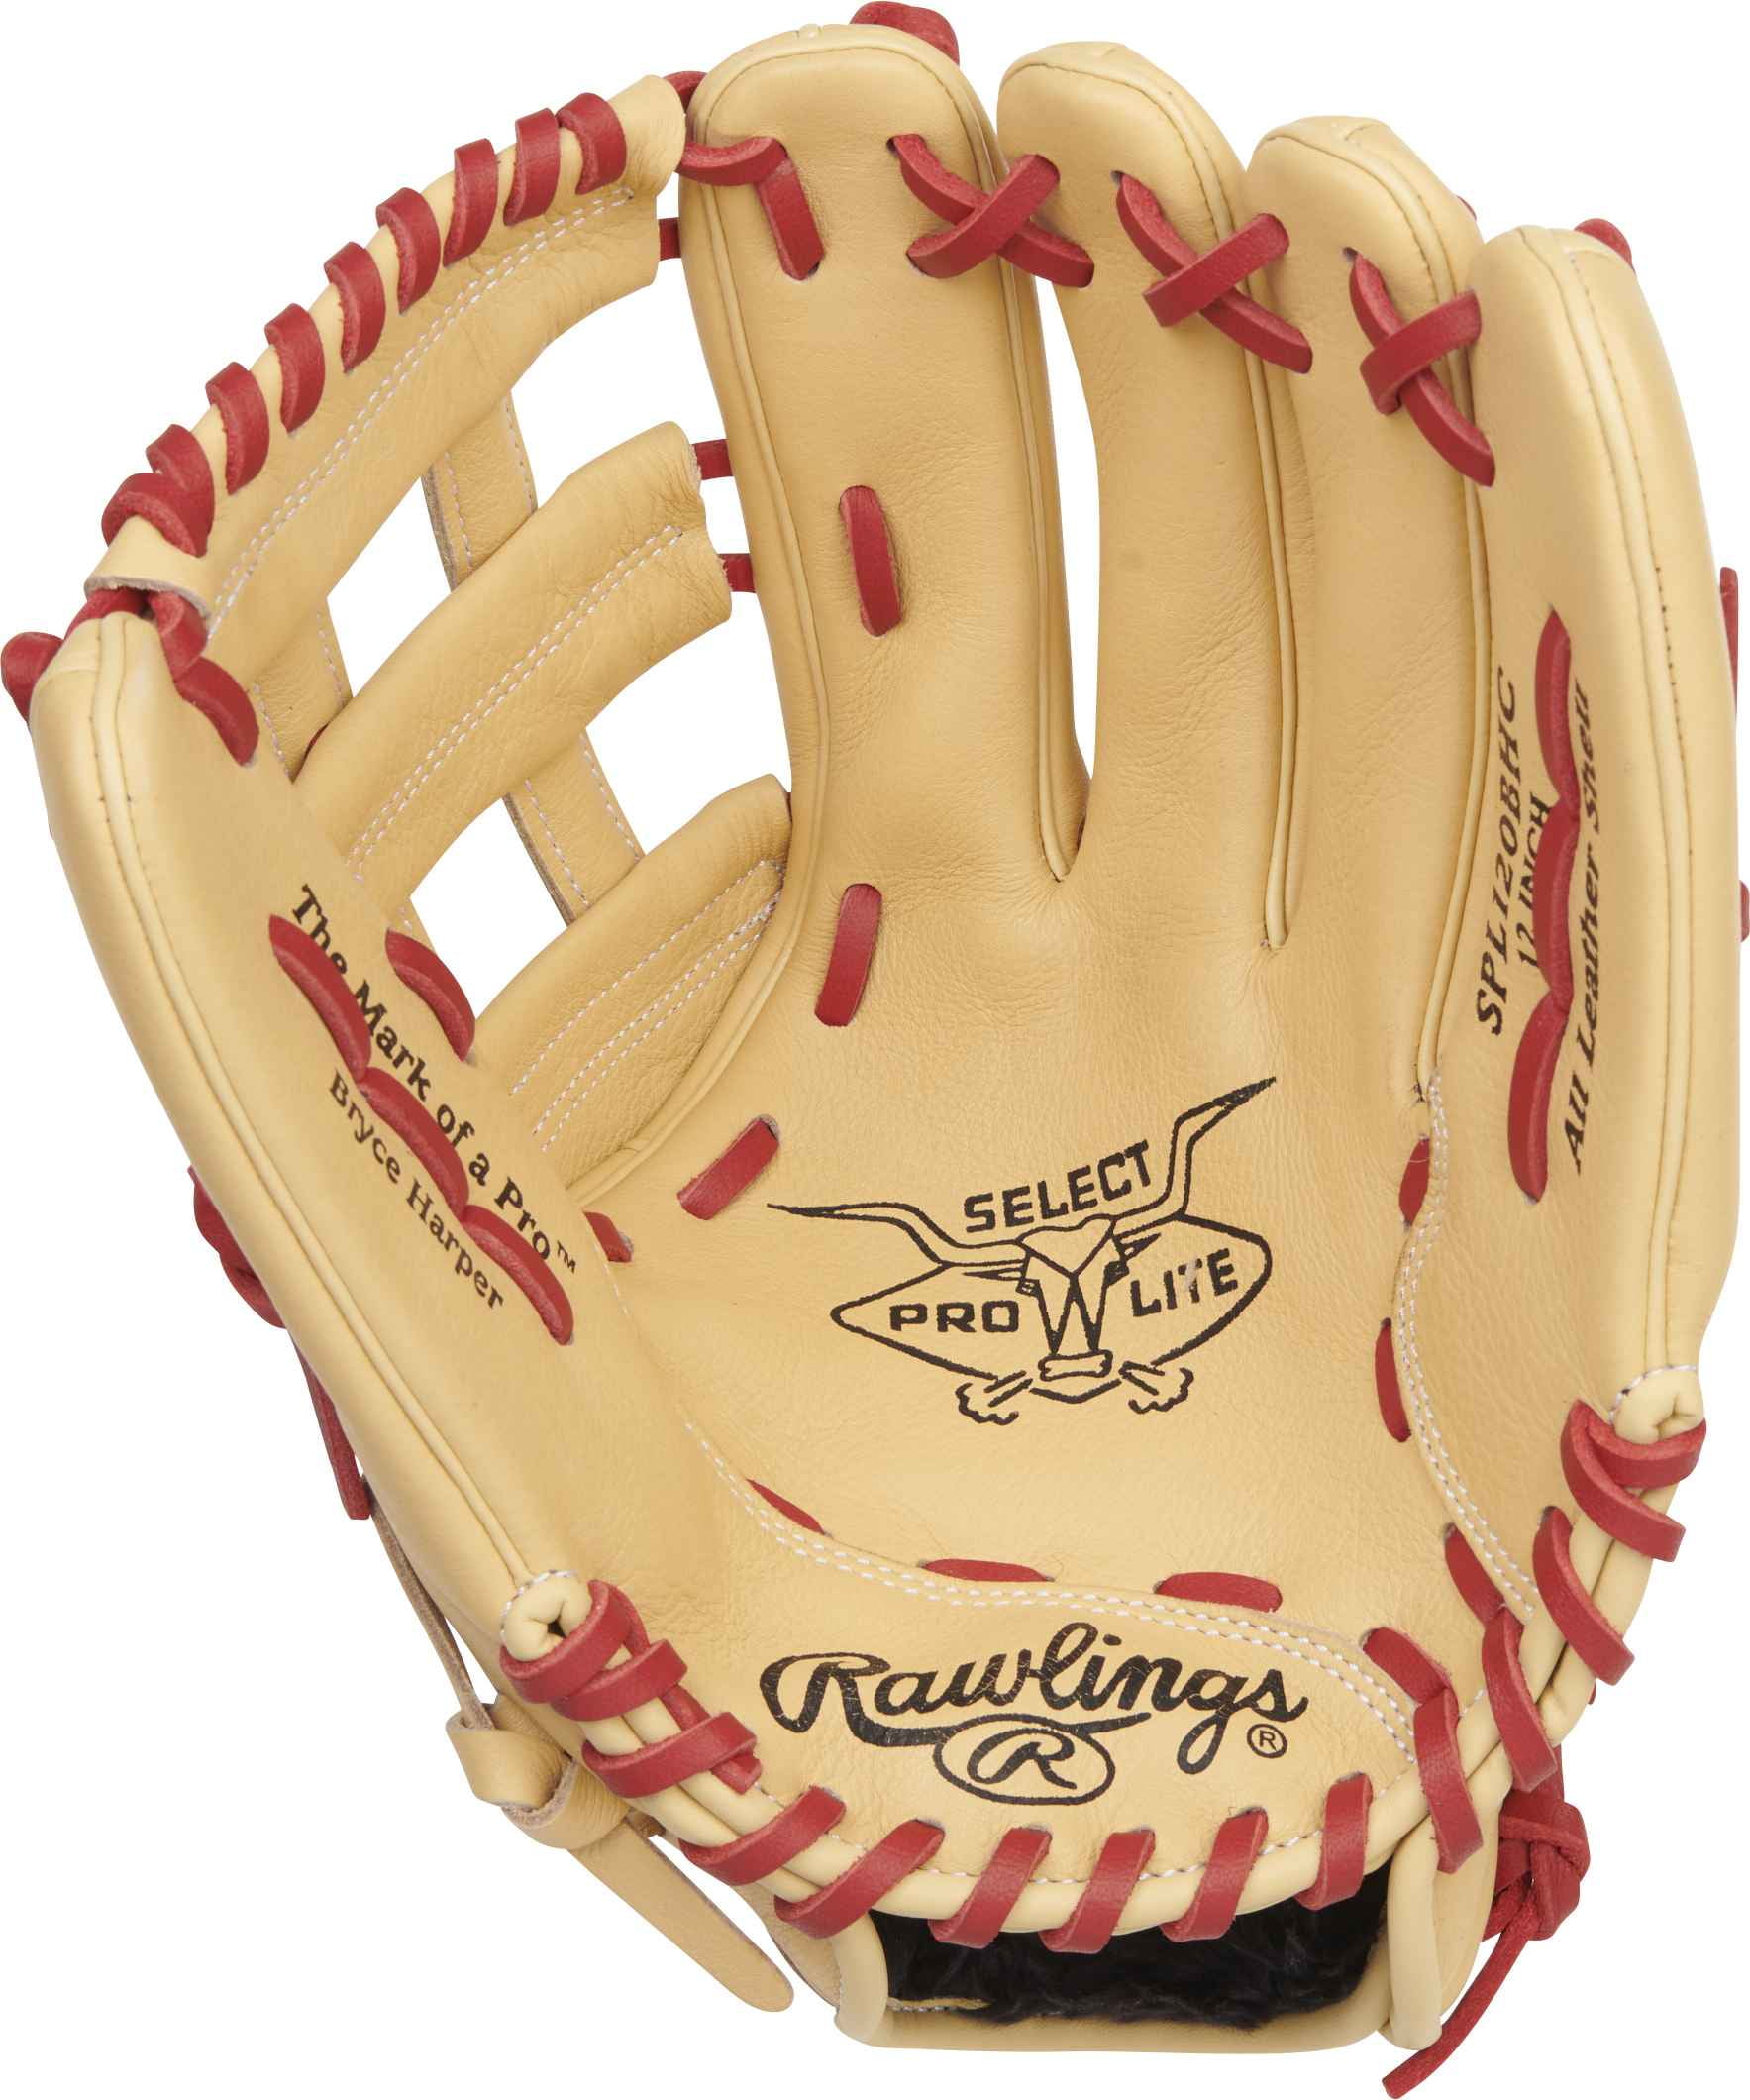 Rawlings Select Pro Lite 12-inch Glove - Bryce Harper, Right Hand Throw